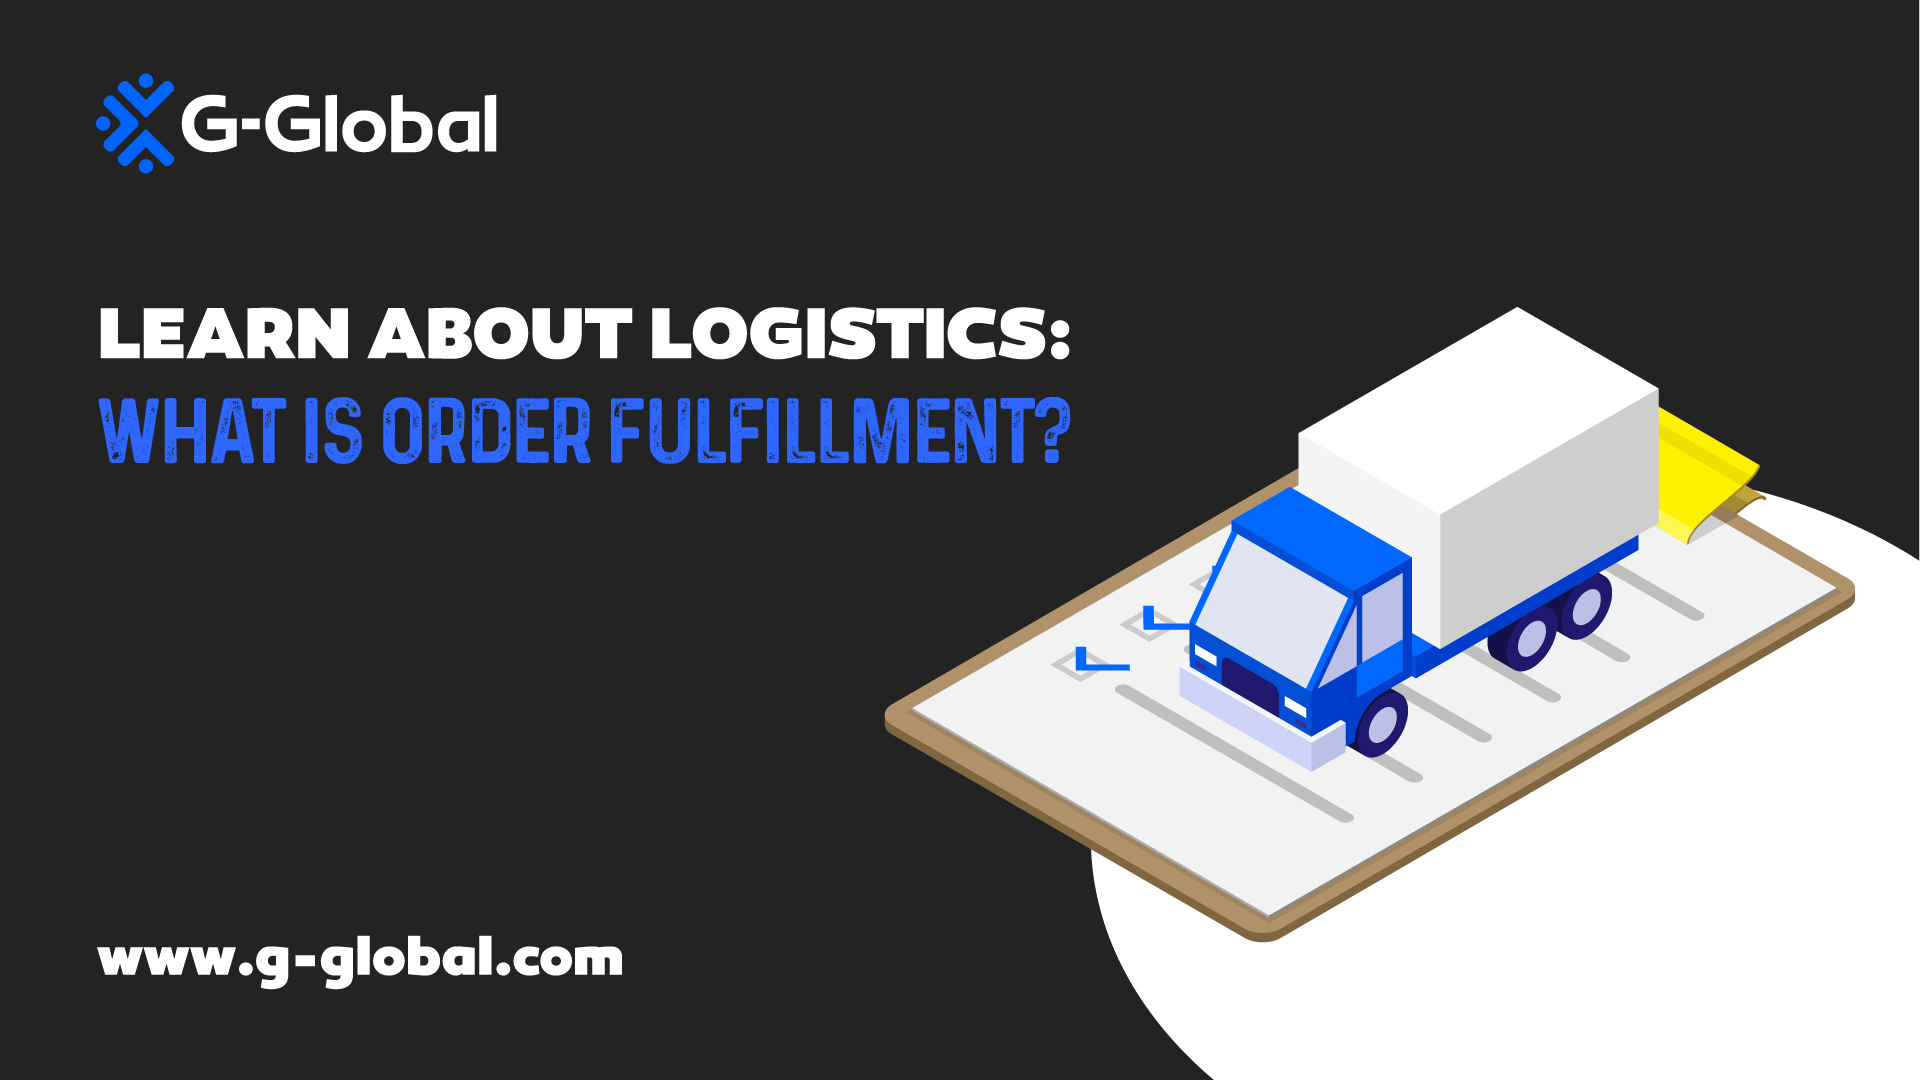 Learn about Logistics: What is Order Fulfillment?